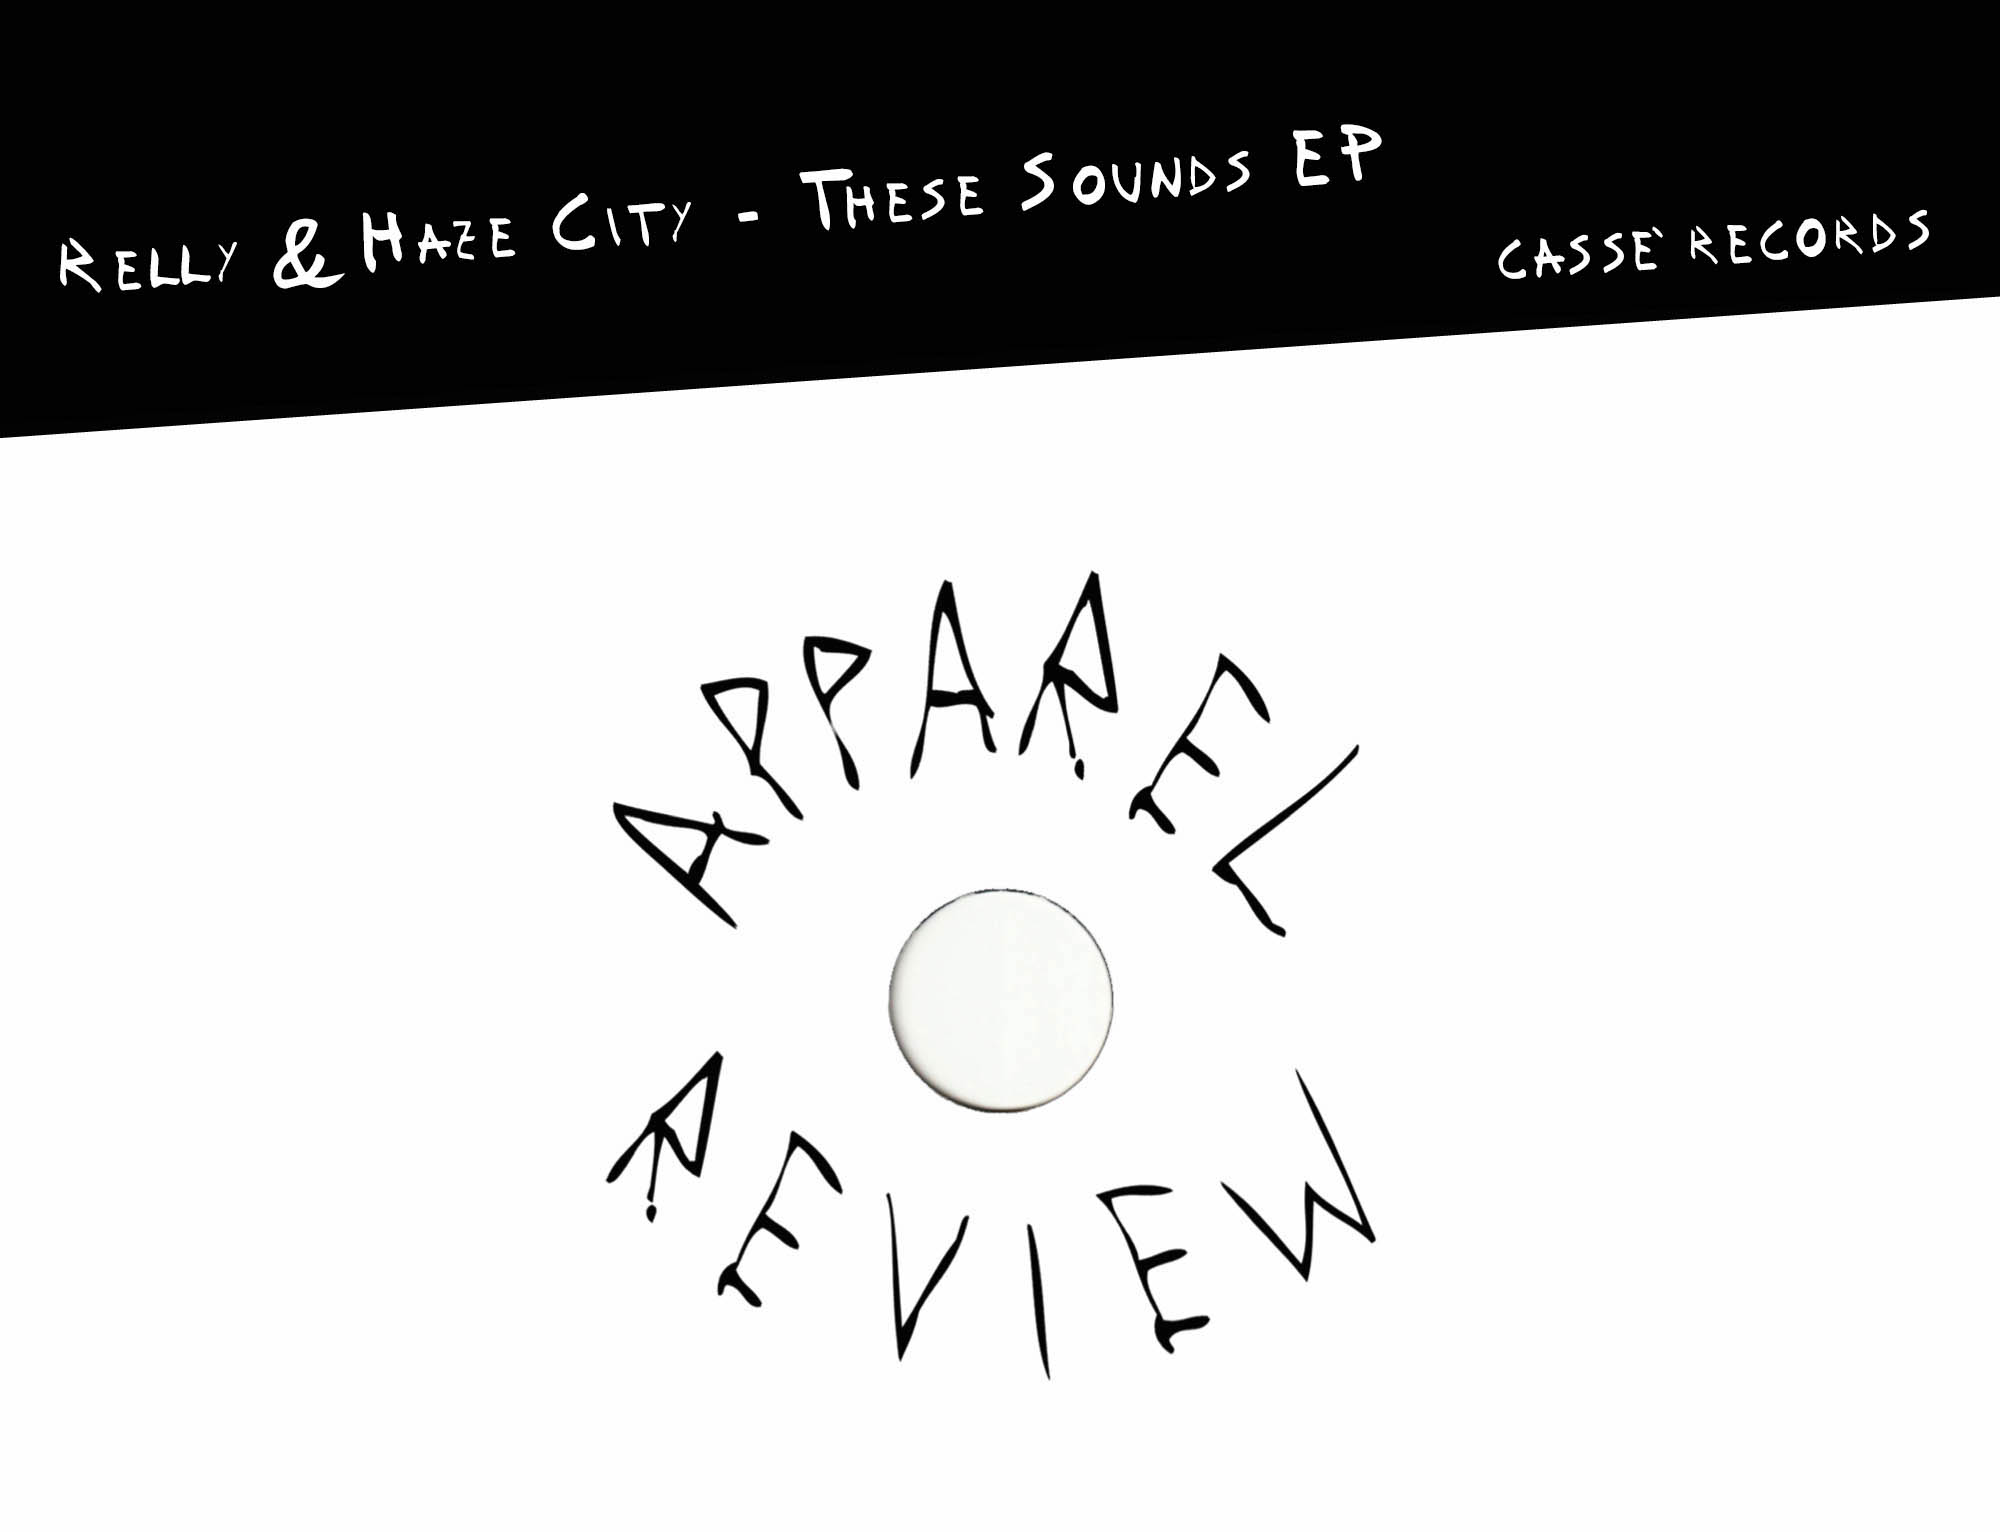 Apparel-Review Relly & Haze City – These Sounds EP [Cassé Records] cut